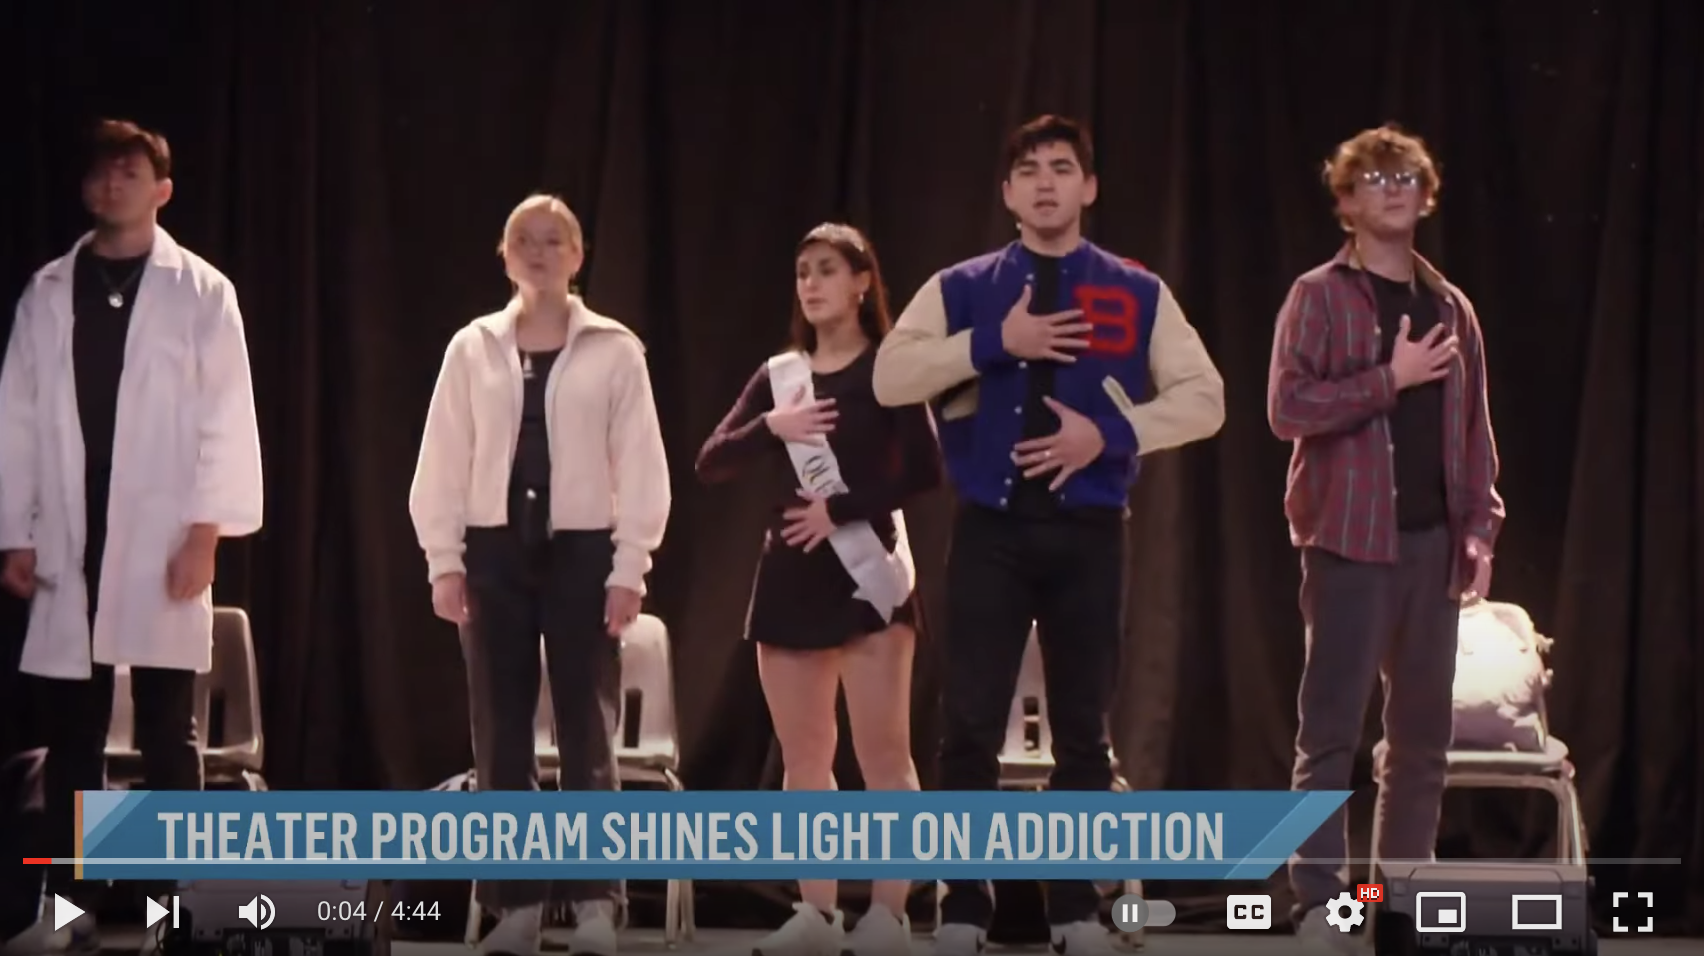 School of Music, Theatre and Dance students perform Painless: The Musical. Watch the Today Show segment about the musical.